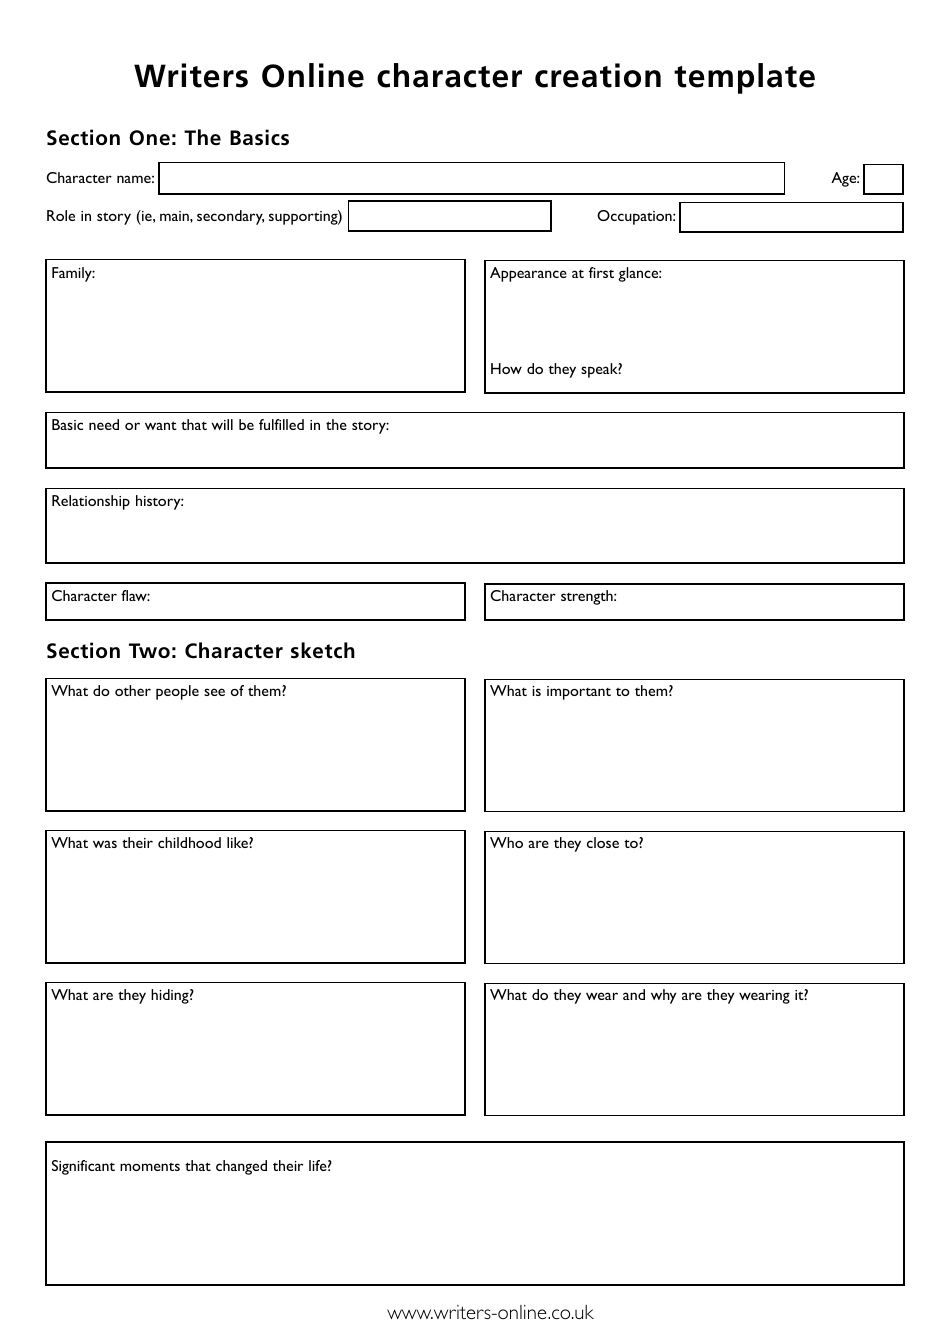 Character Creation Template - Preview of Document